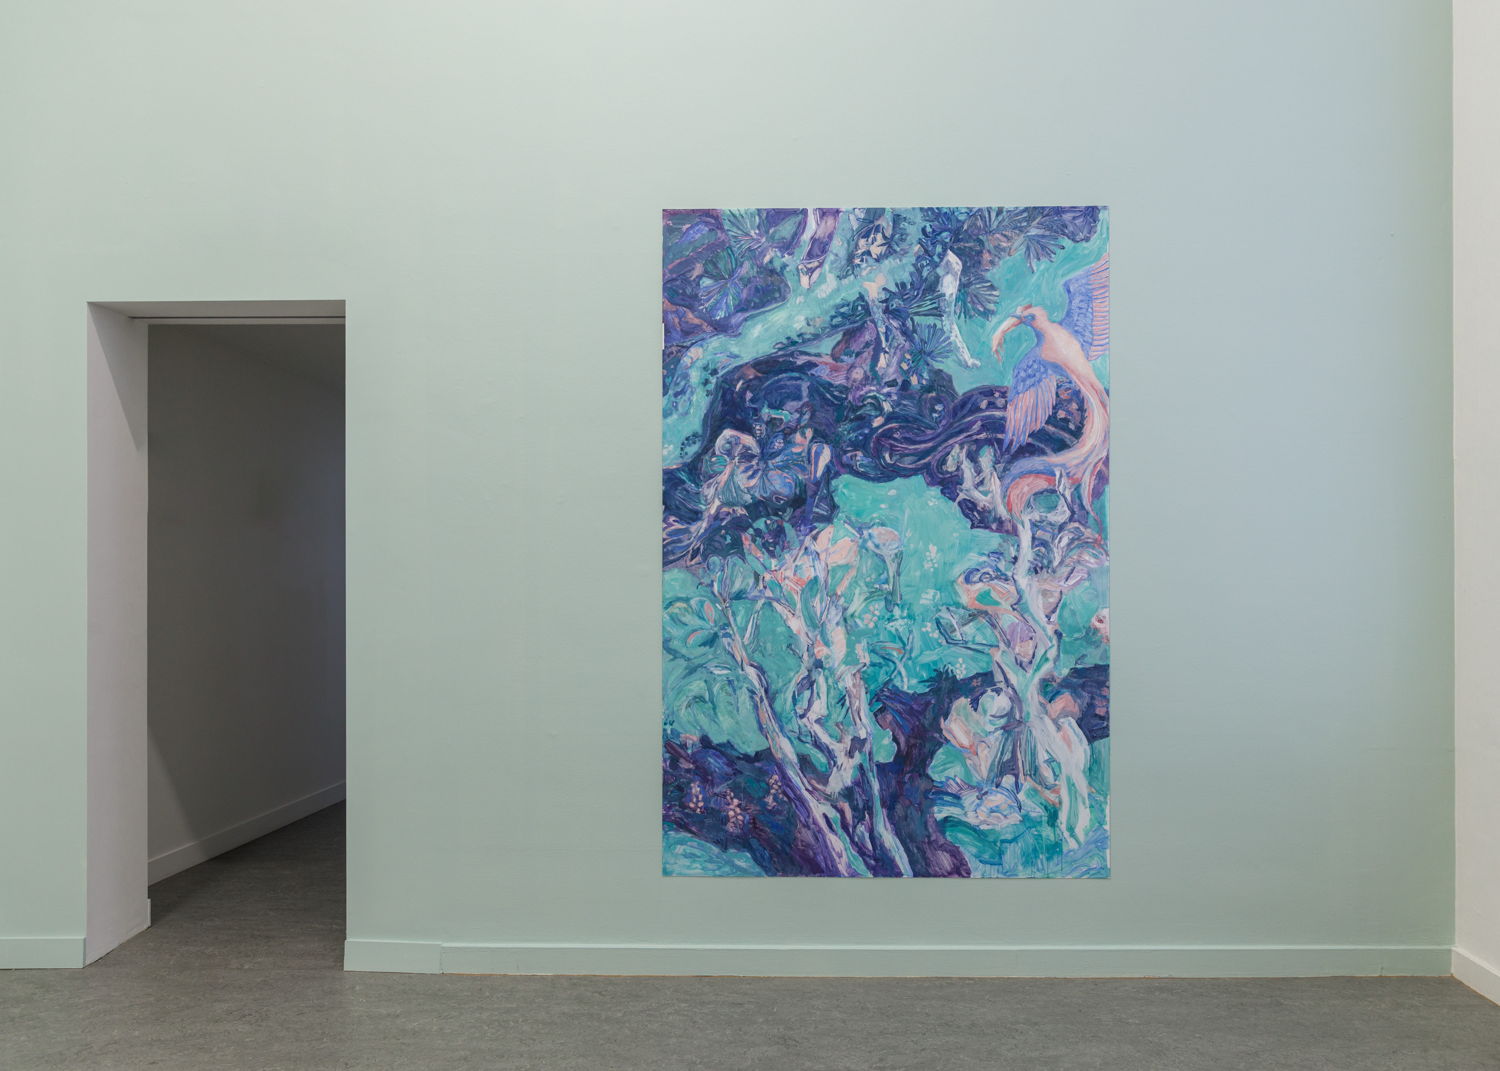 
Elias Ghekiere, TTSA Study (A Road Paved with Good Intentions), 2022. Oil paint on laminated vinyl, 150.2 x 225 cm. Installation view, Z33, Hasselt, 2022. Photo: Selma Gurbuz. Courtesy the artist.
